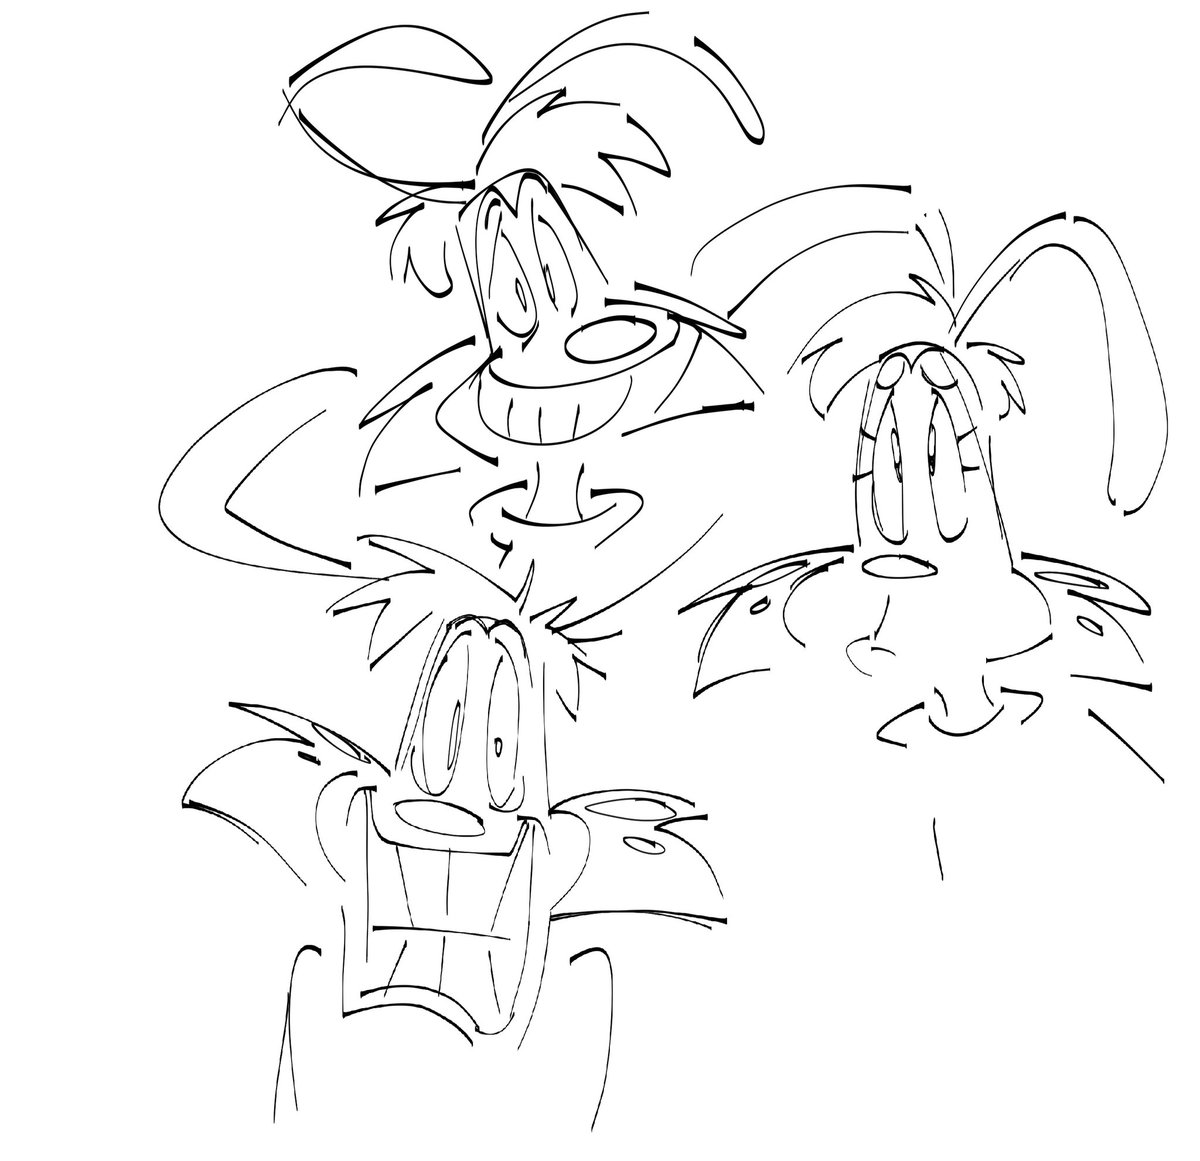 Bonkers is a funny guy to draw 